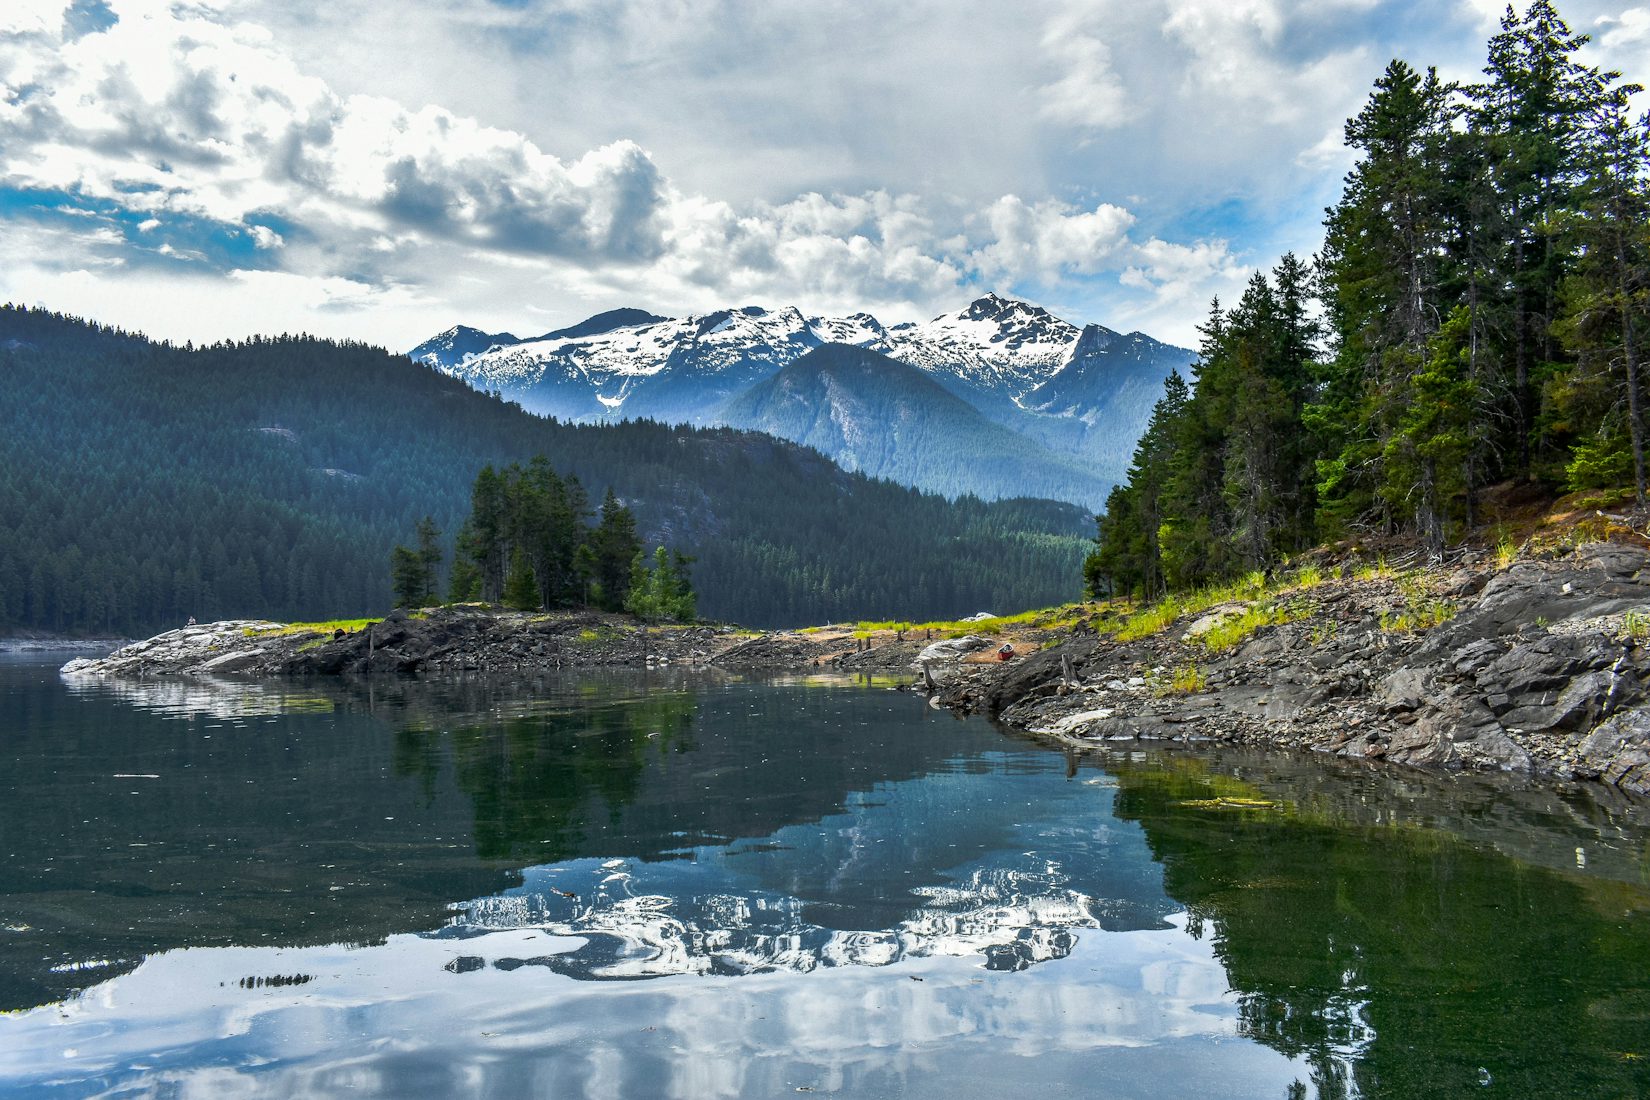 7 Photos That Will Inspire You to Kayak This Beautiful Lake in the